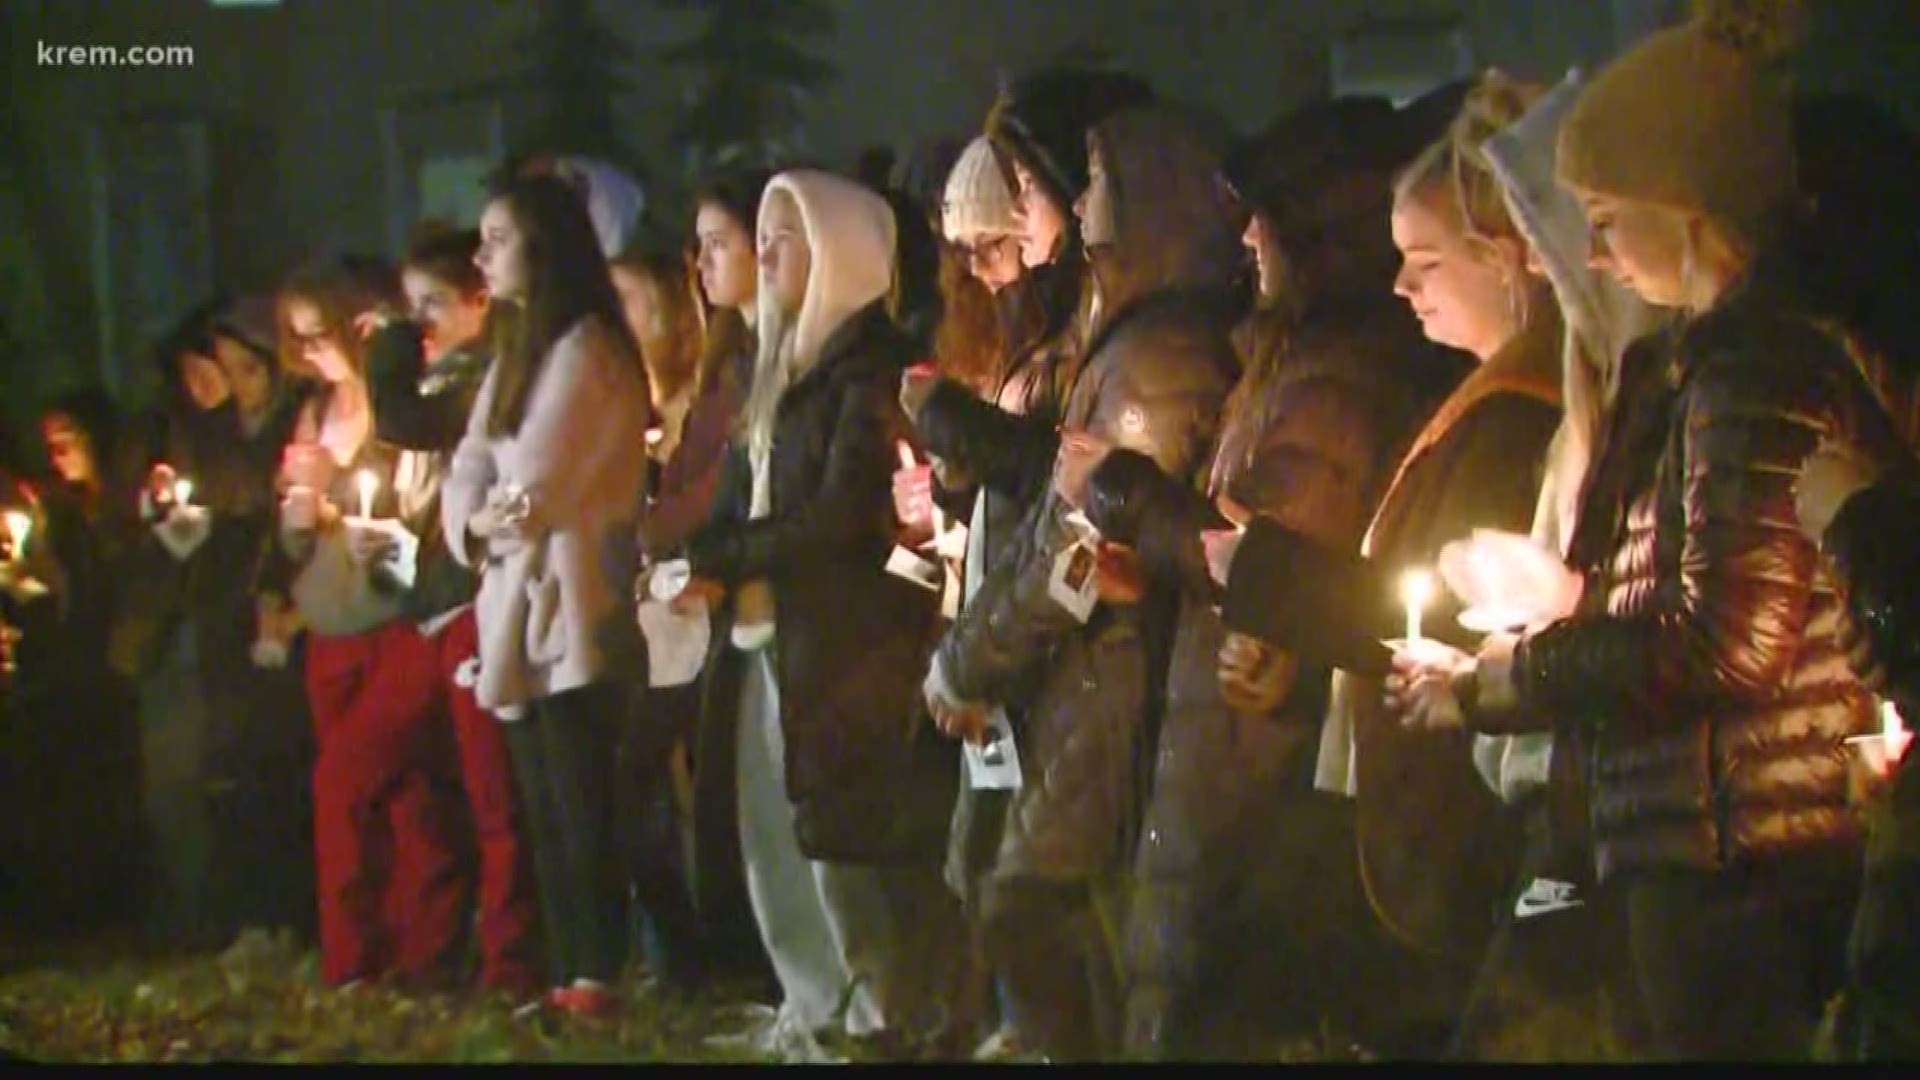 The Pullman community came together to remember the WSU student who died last week.